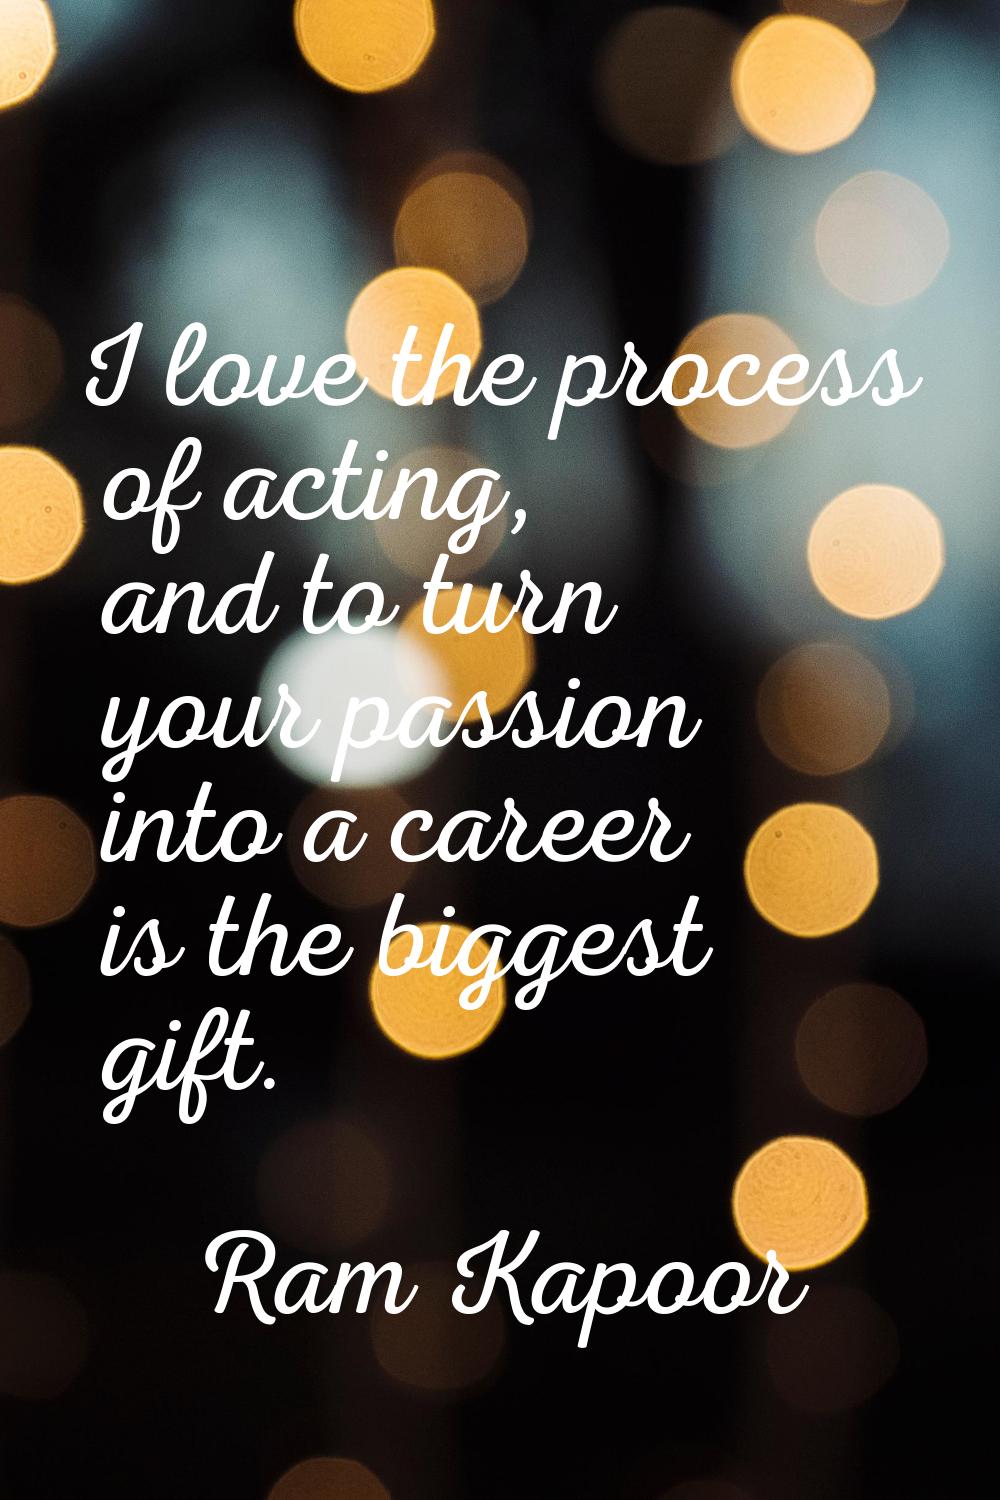 I love the process of acting, and to turn your passion into a career is the biggest gift.